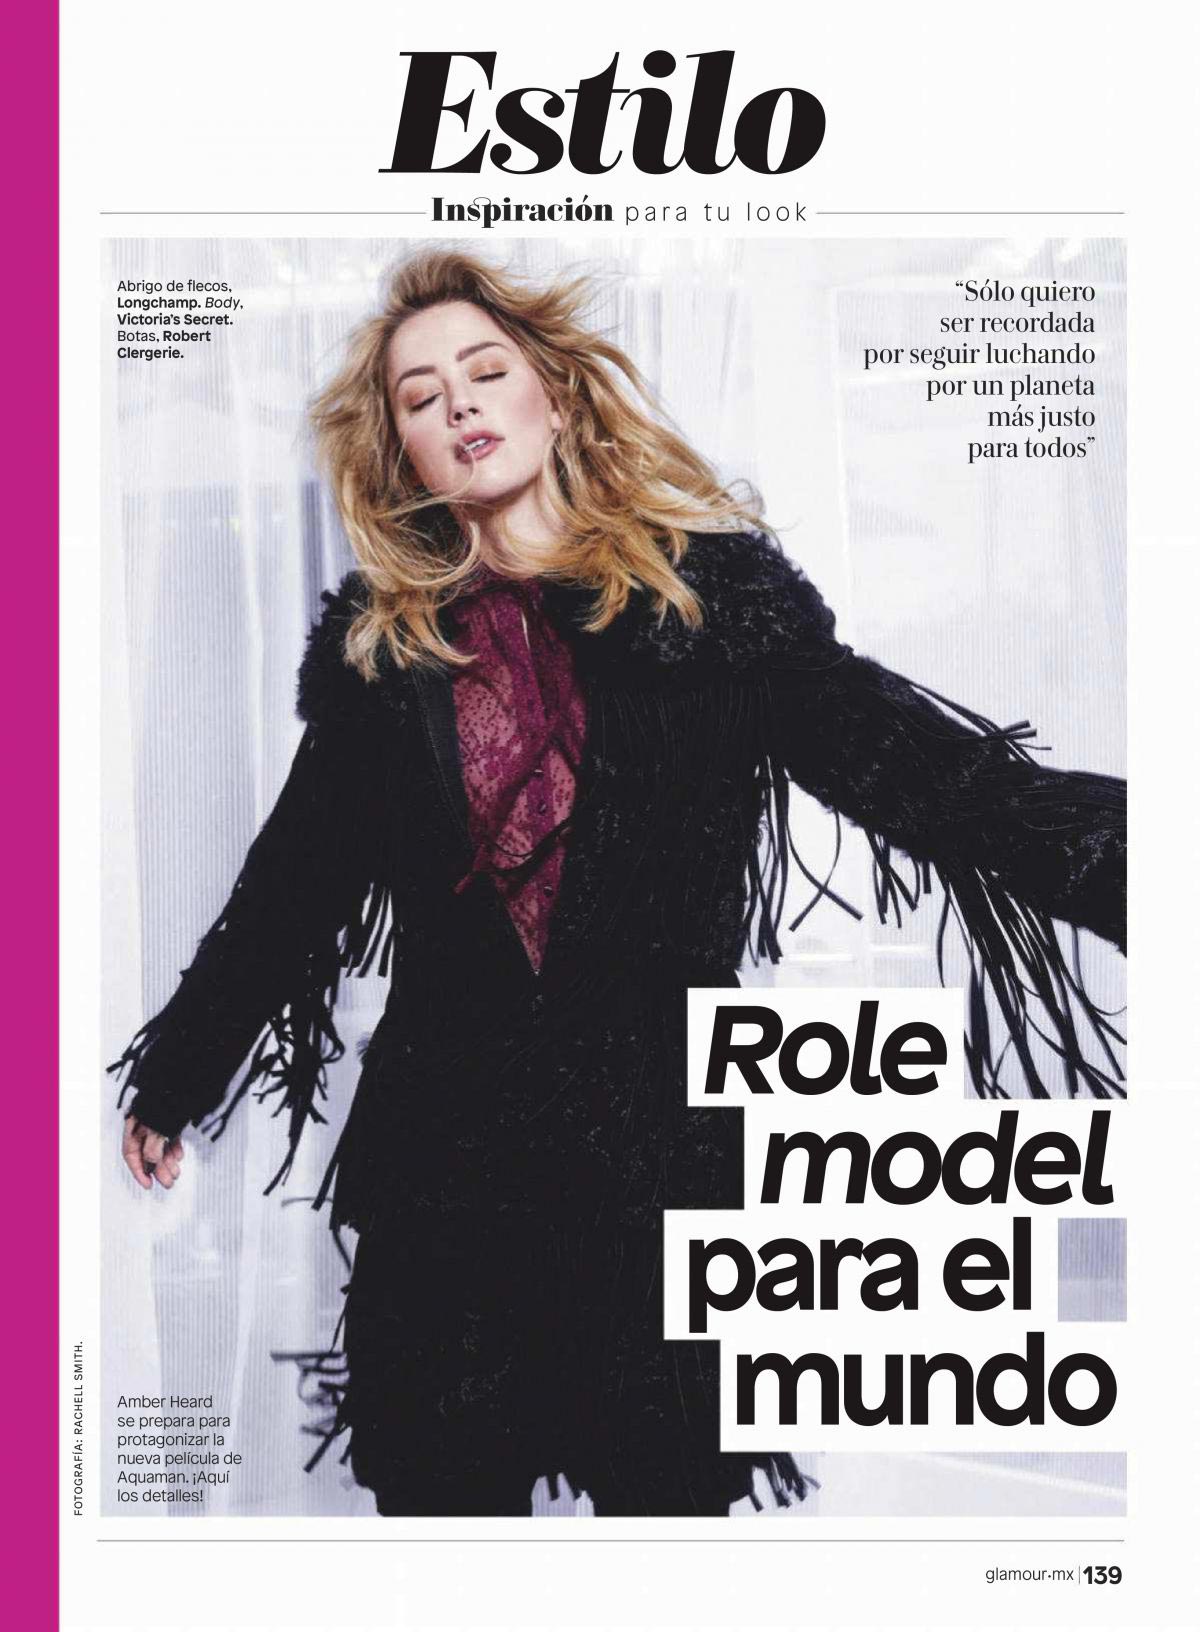 Amber Heard in Glamour Magazine, Mexico December 2018